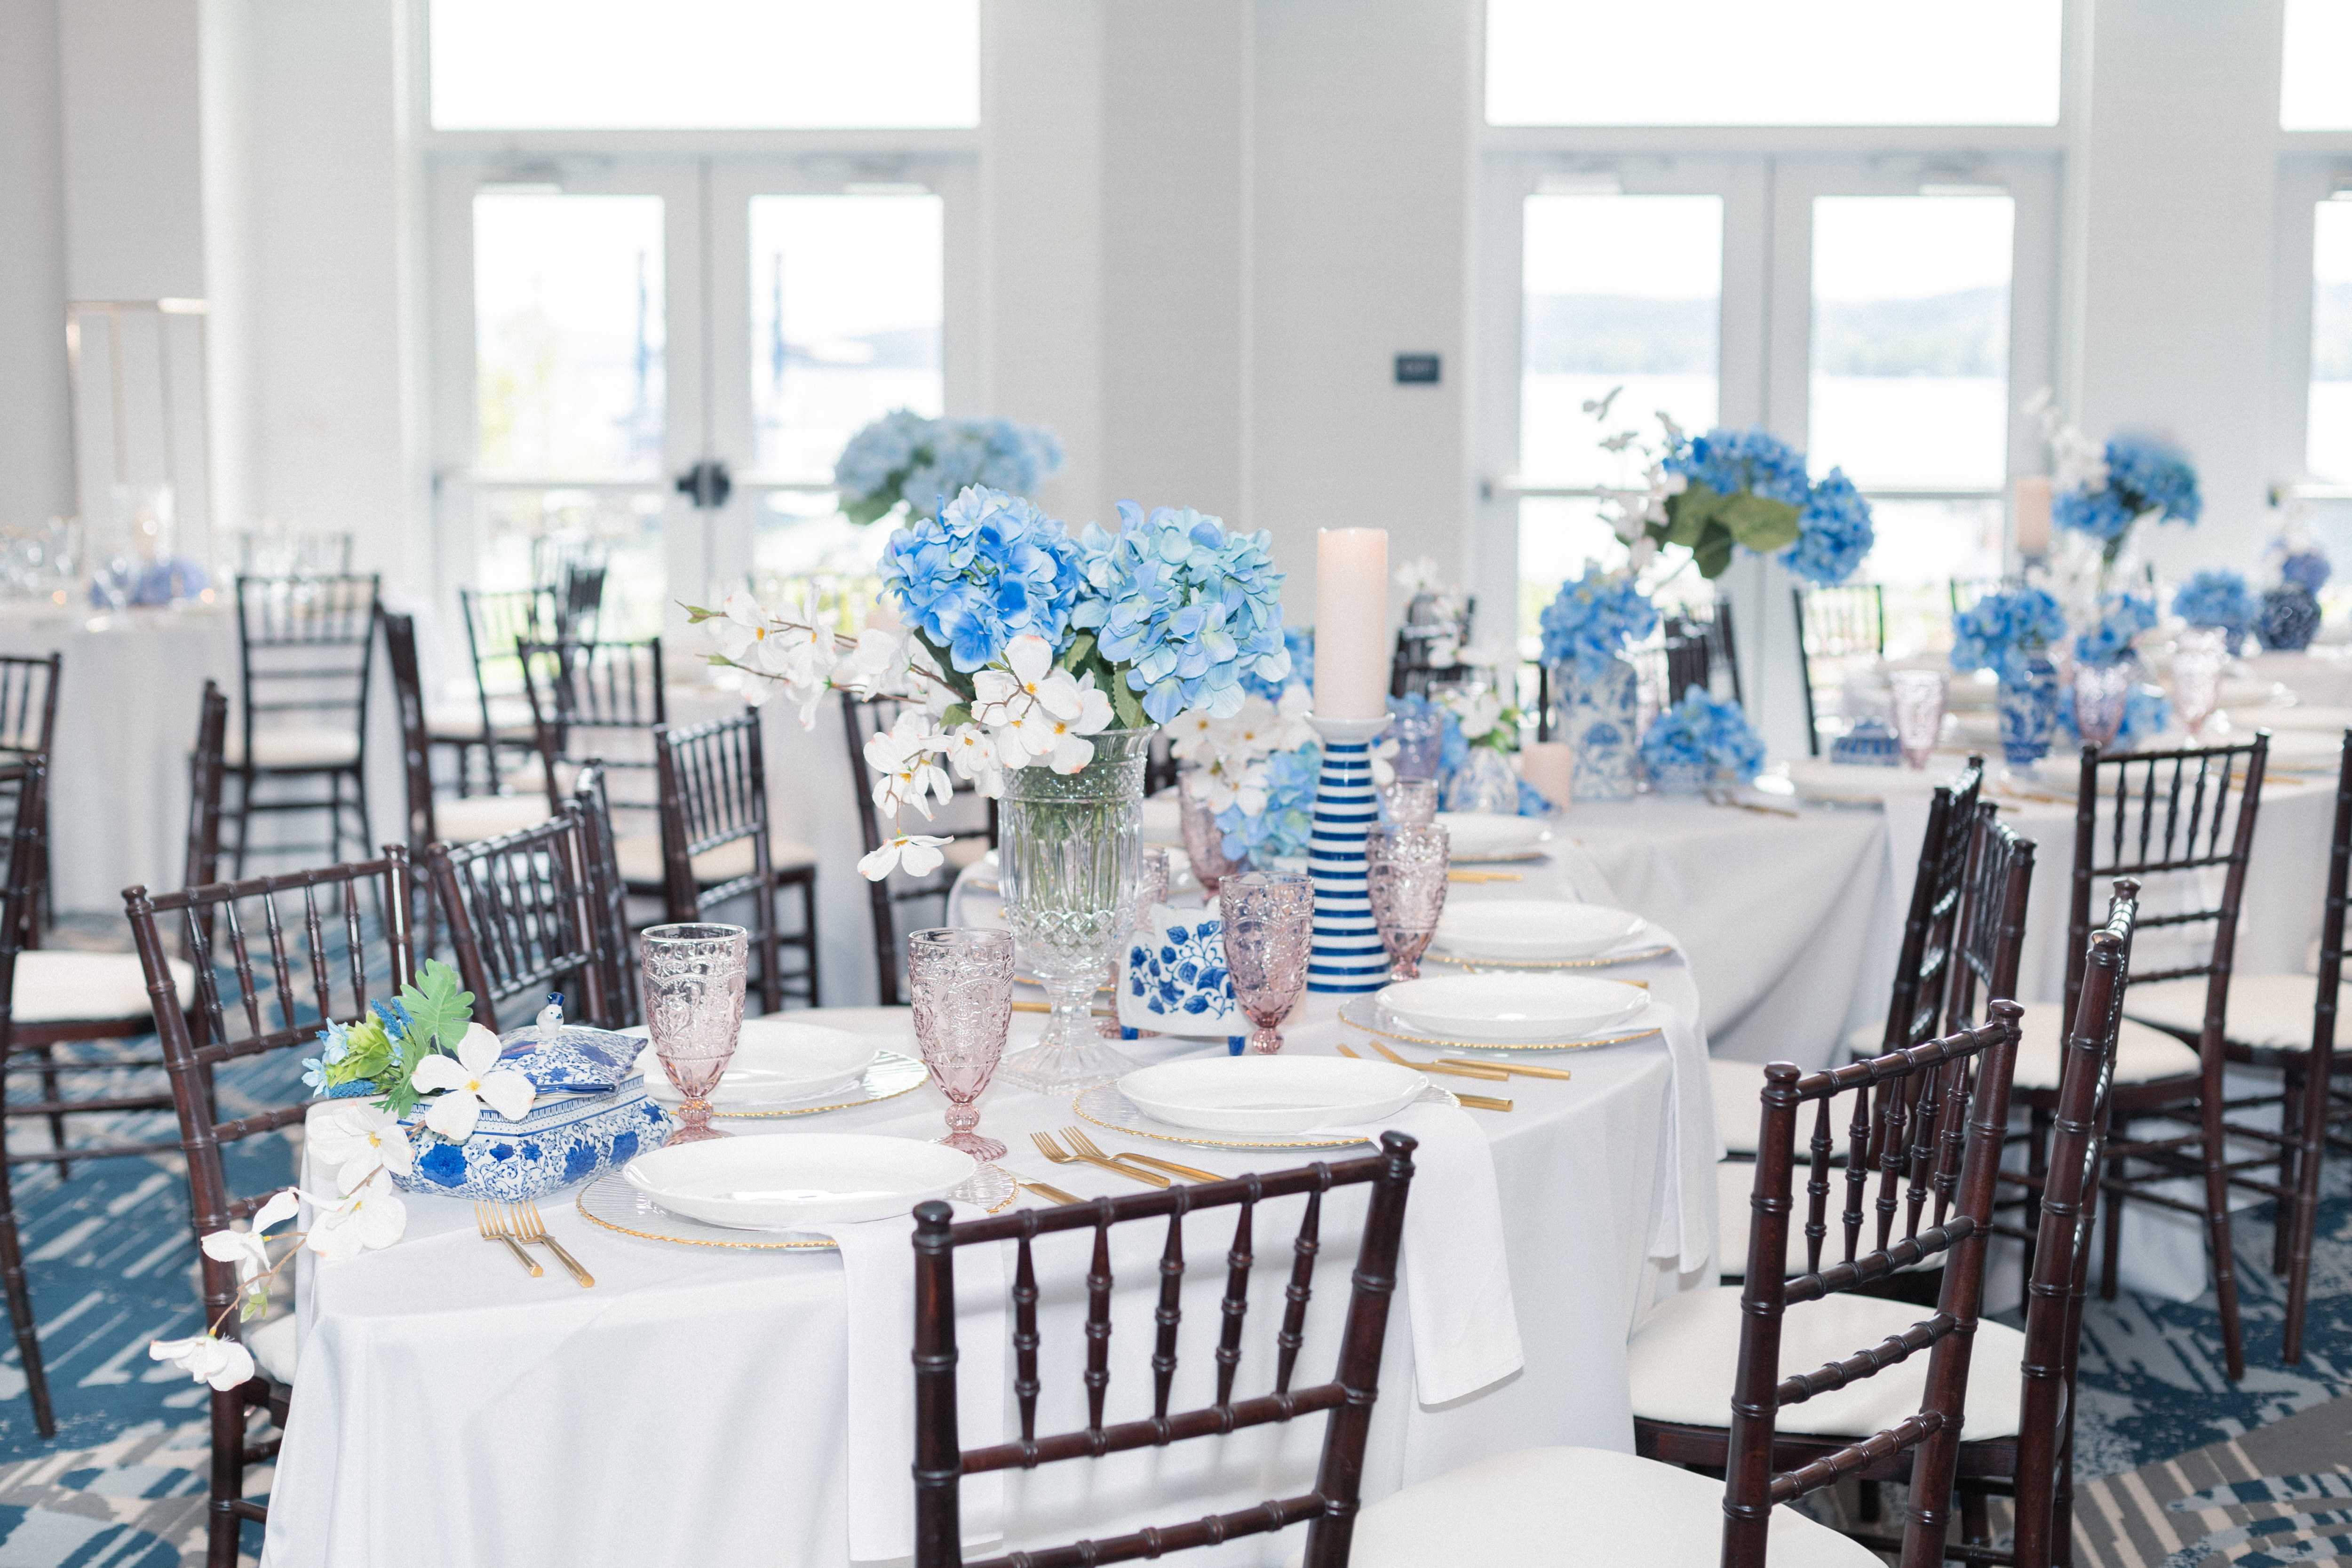 Wedding setup with tables, chairs and flowers